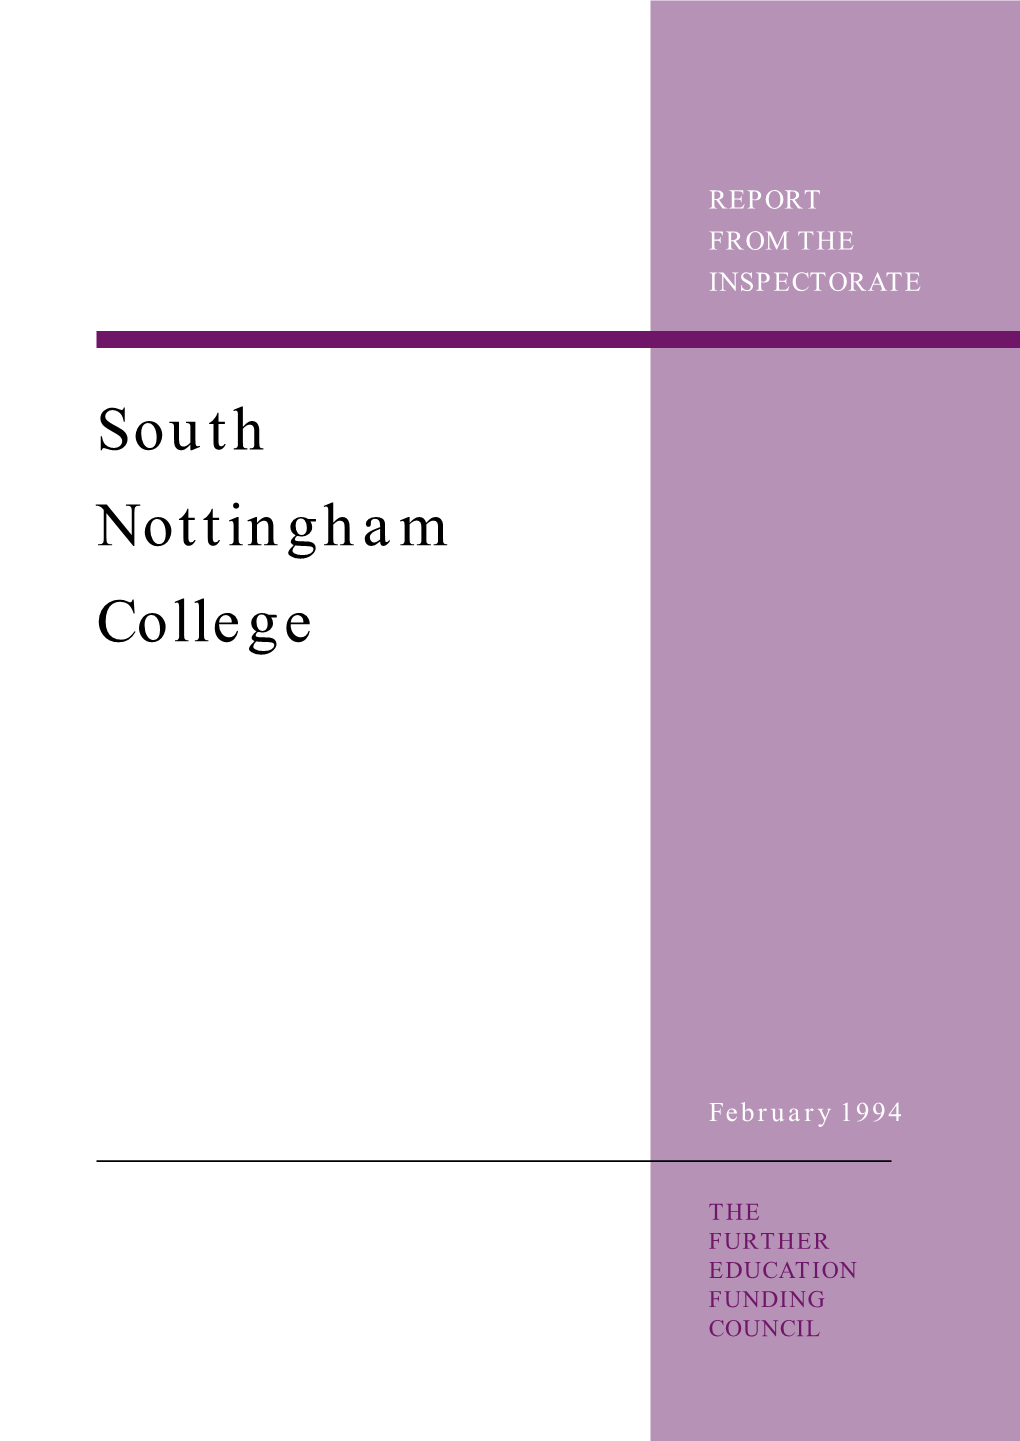 South Nottingham College